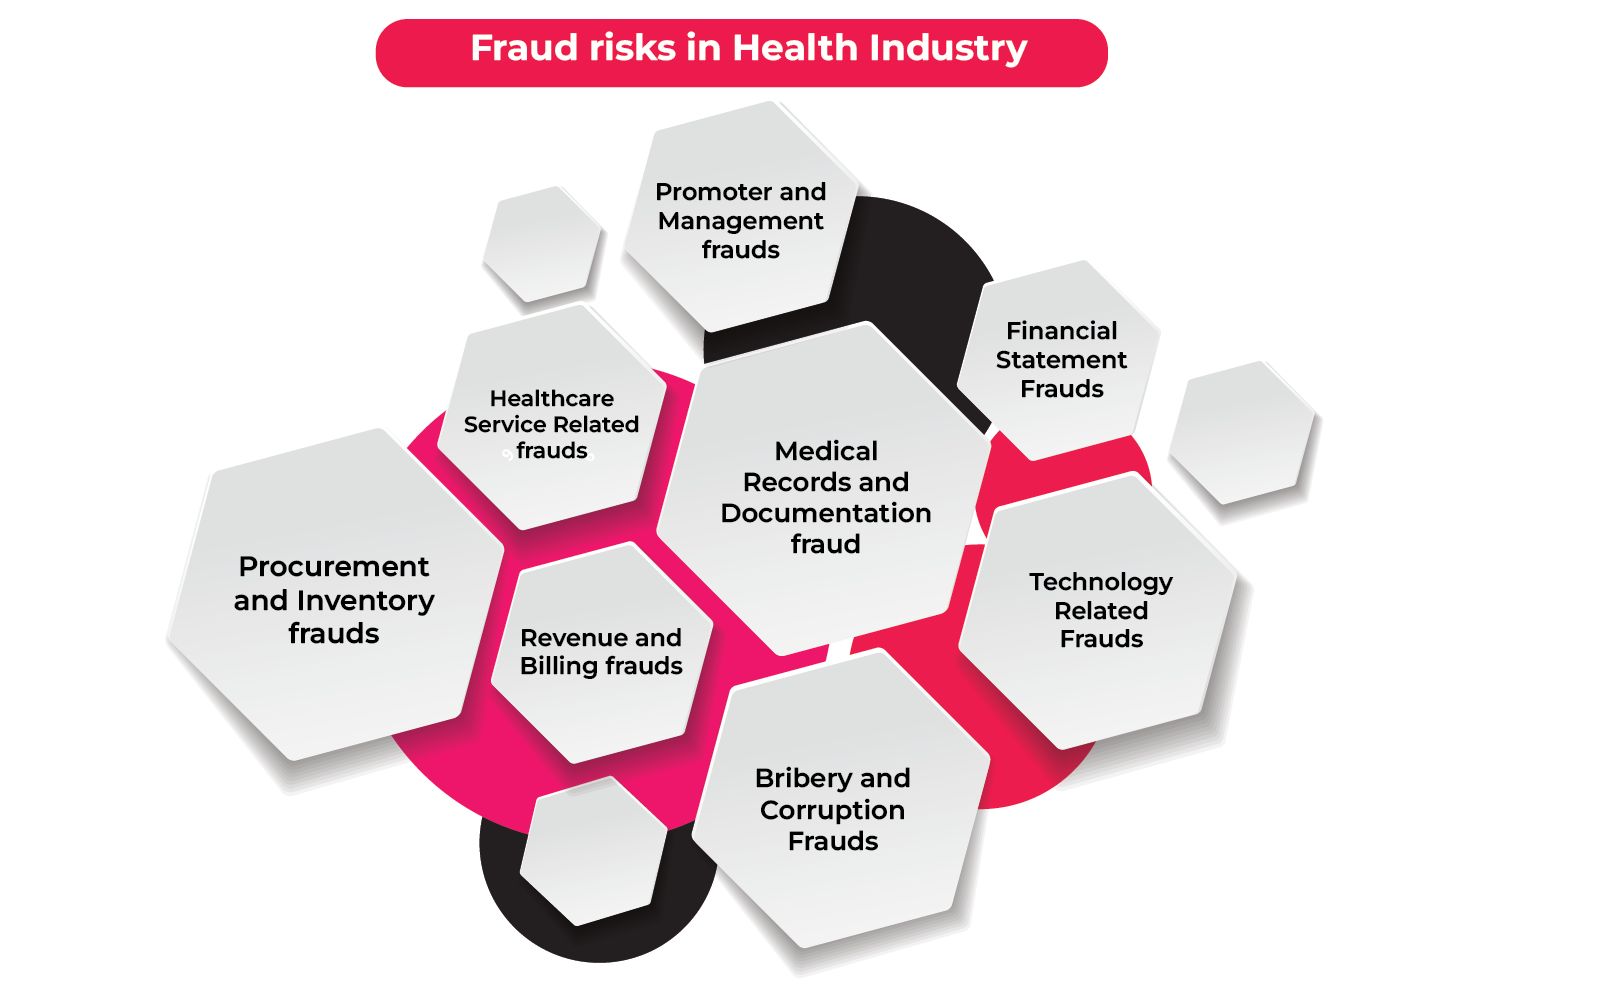 Infographic displaying Types of fraud risks in hospital and medical industry that needs to be solved through internal audit